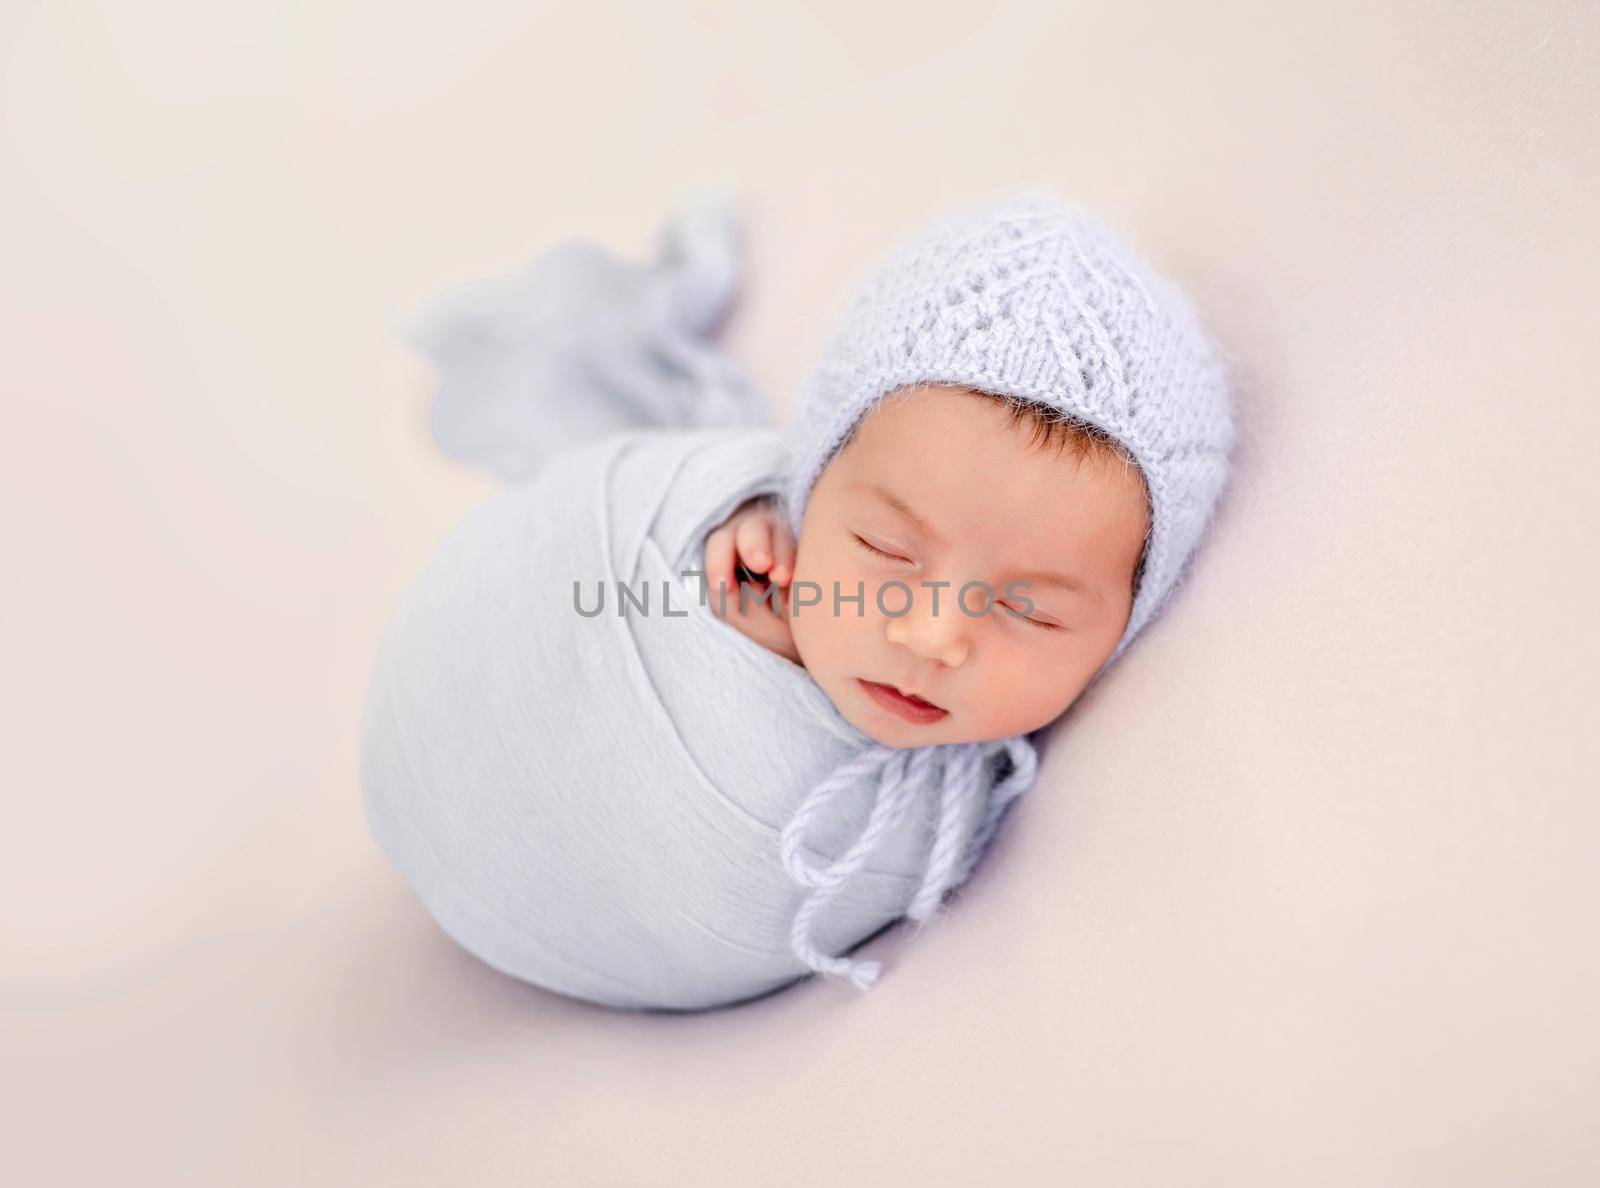 Little beautiful newborn baby girl swaadled in fabric and wearing knitted hat sleeping during studio photoshoot. Cute infant child kid napping resting